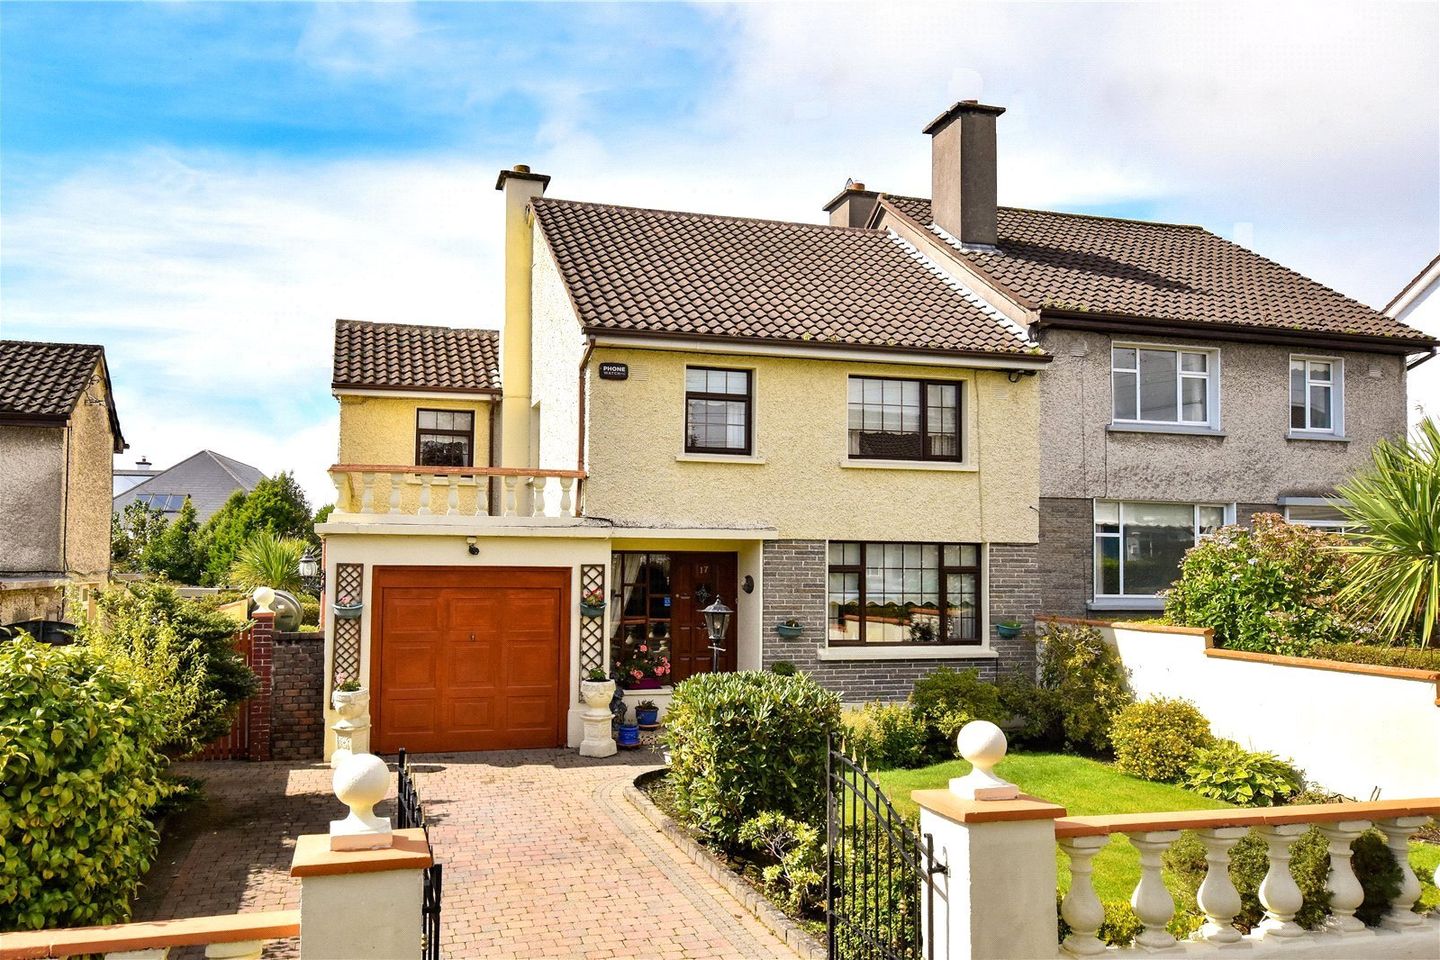 17 Glenard Avenue, Salthill, Co. Galway, H91NFY0